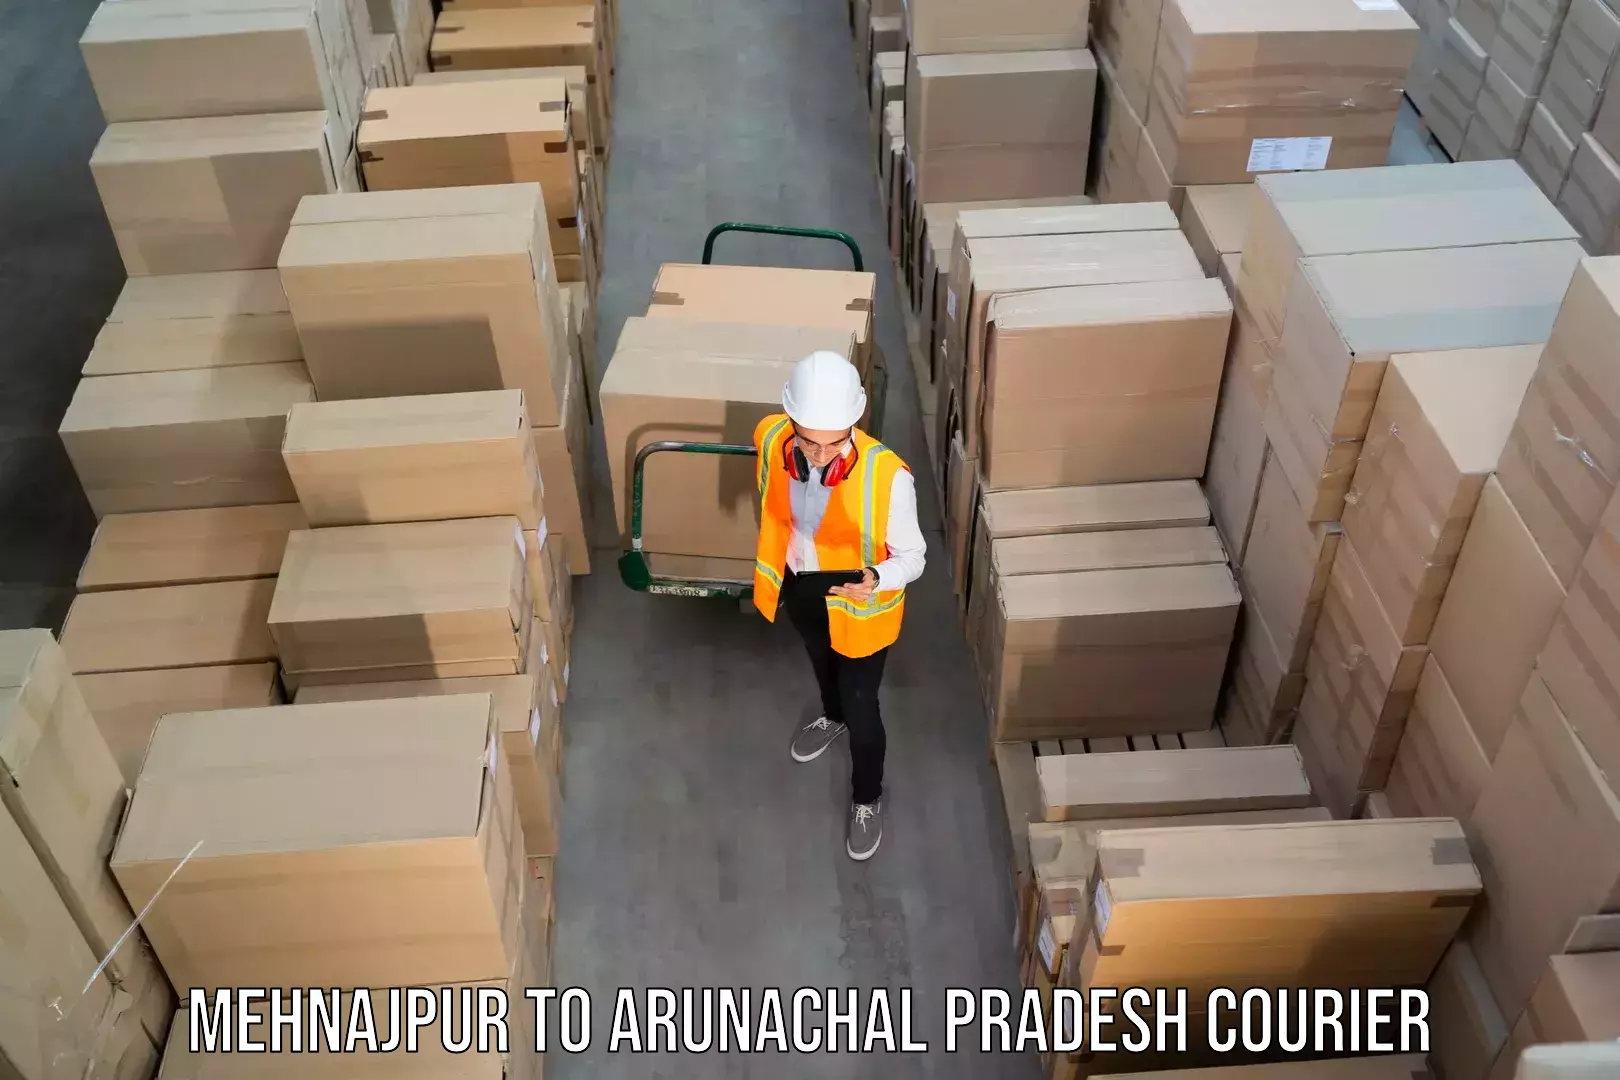 Budget-friendly shipping Mehnajpur to Aalo